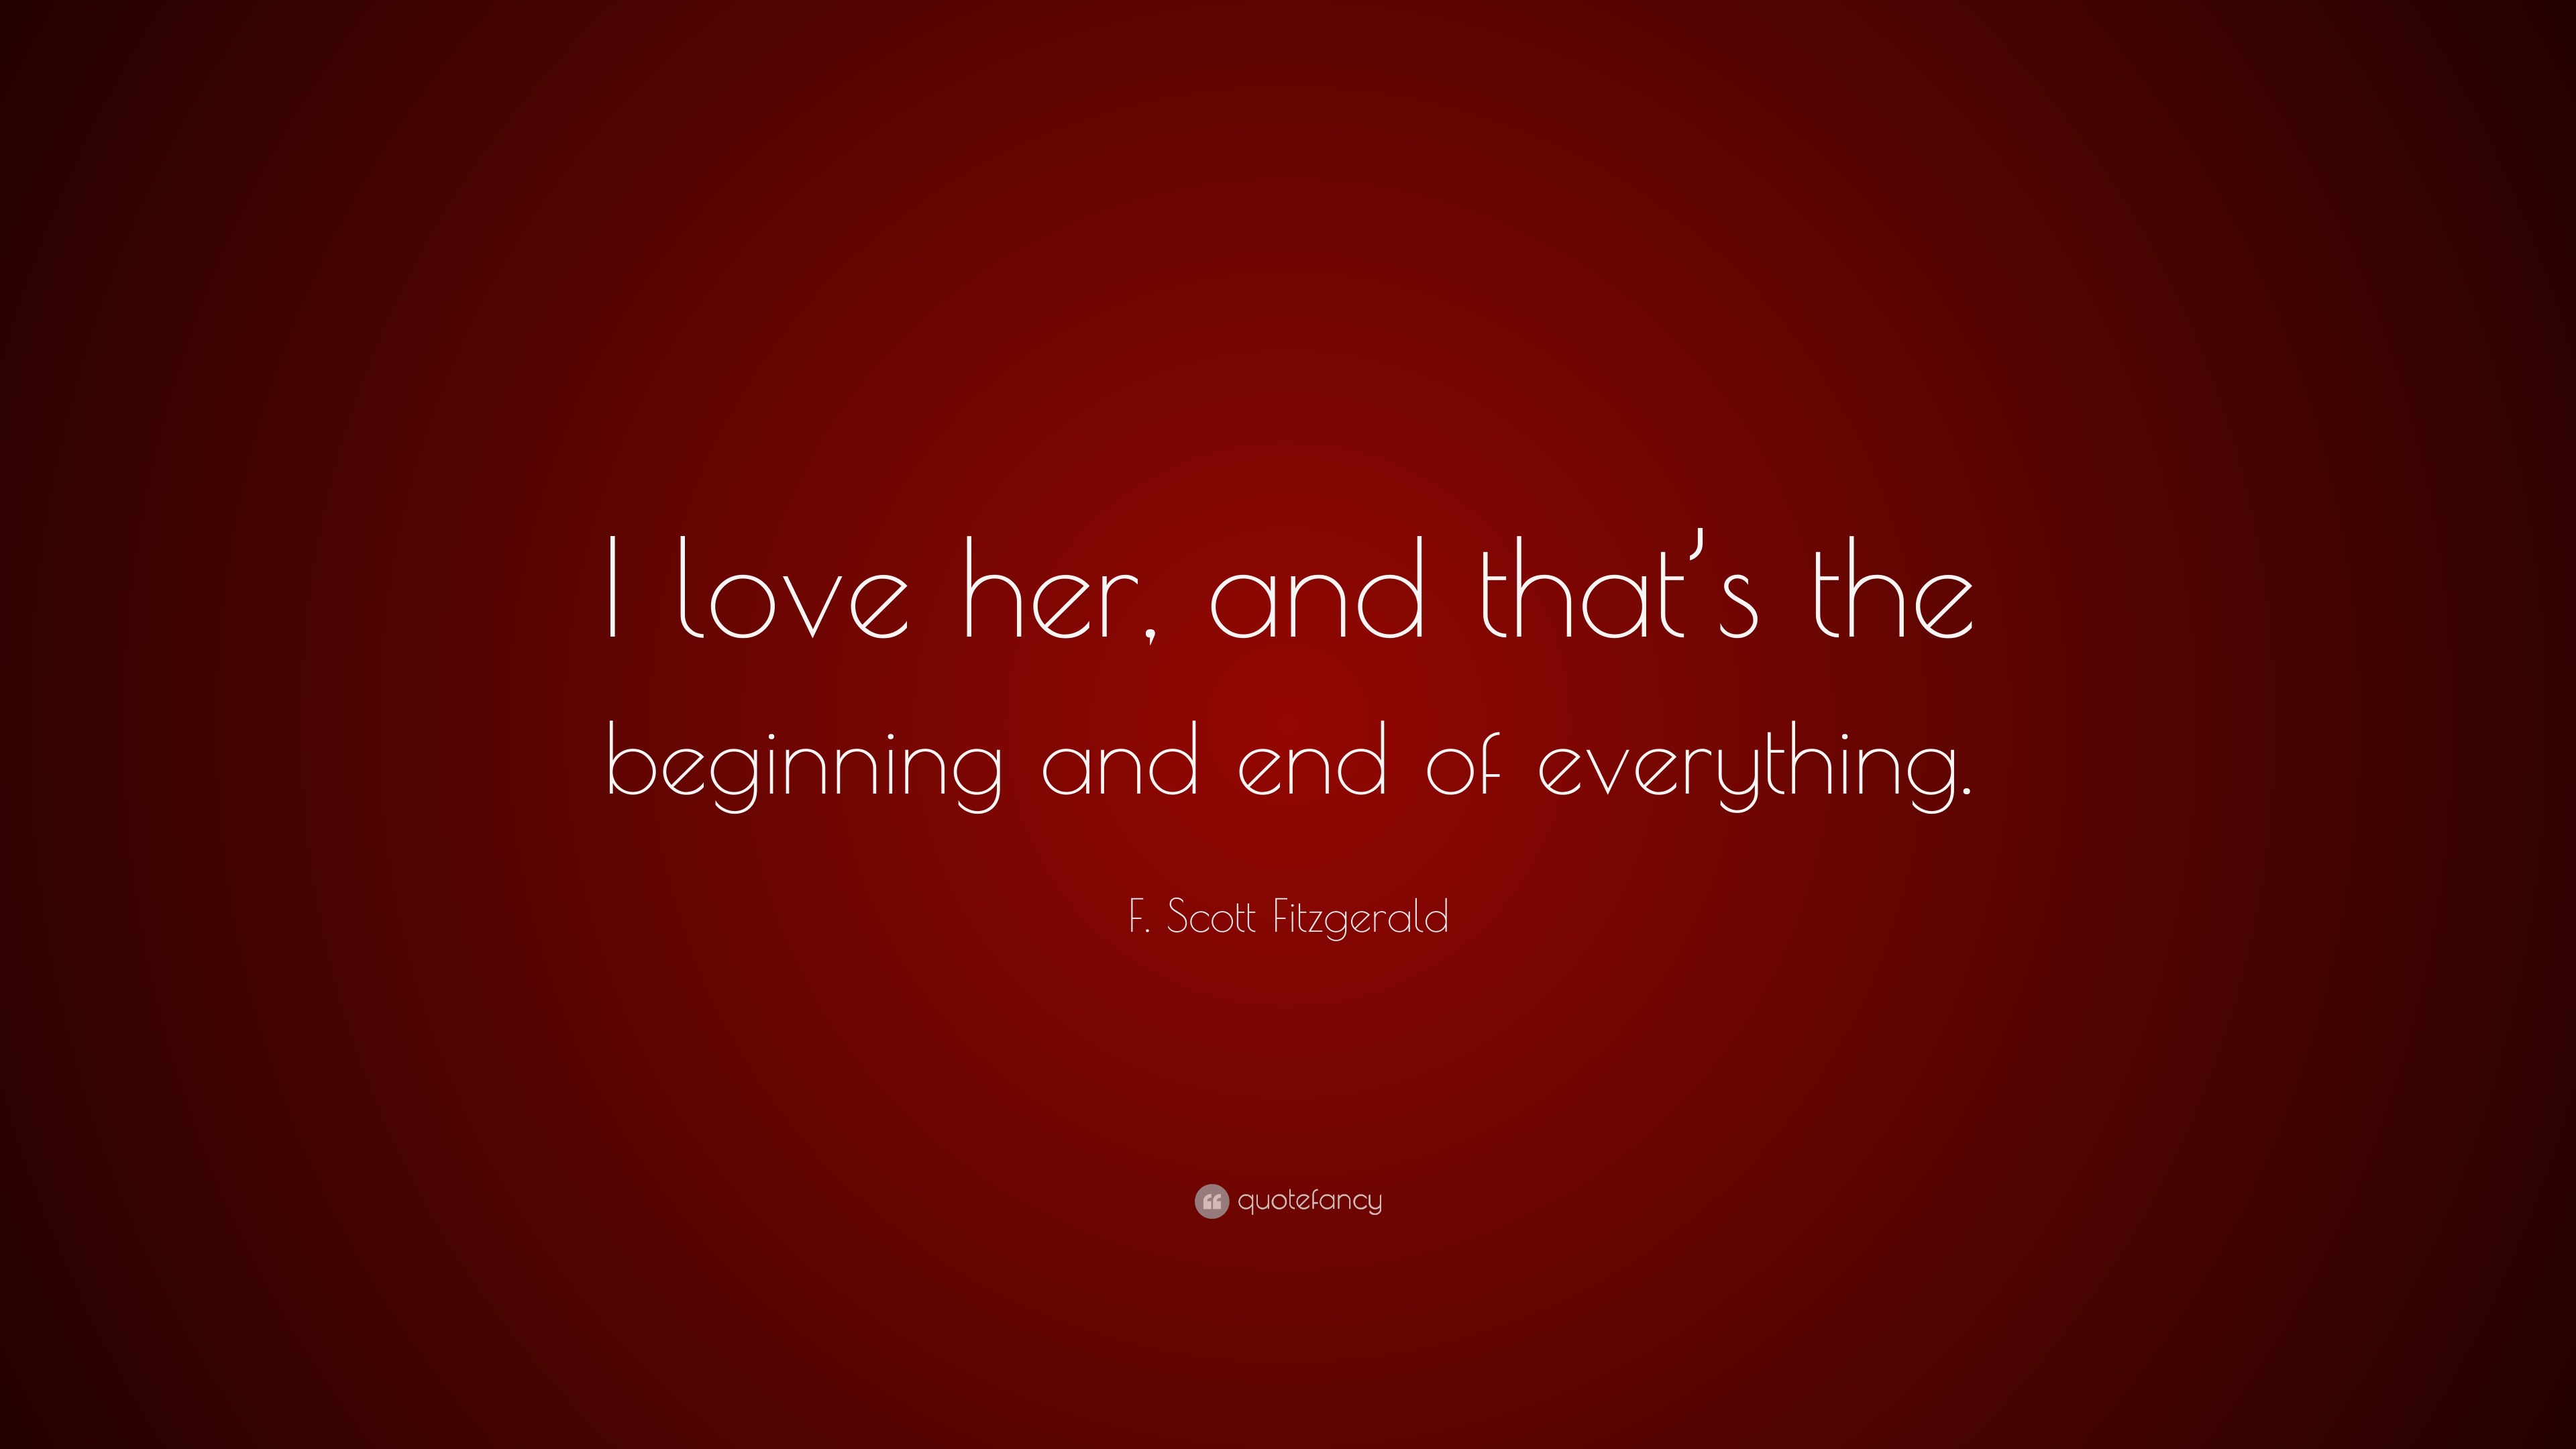 F Scott Fitzgerald Quote I Love Her And That S The Beginning And End Of Everything